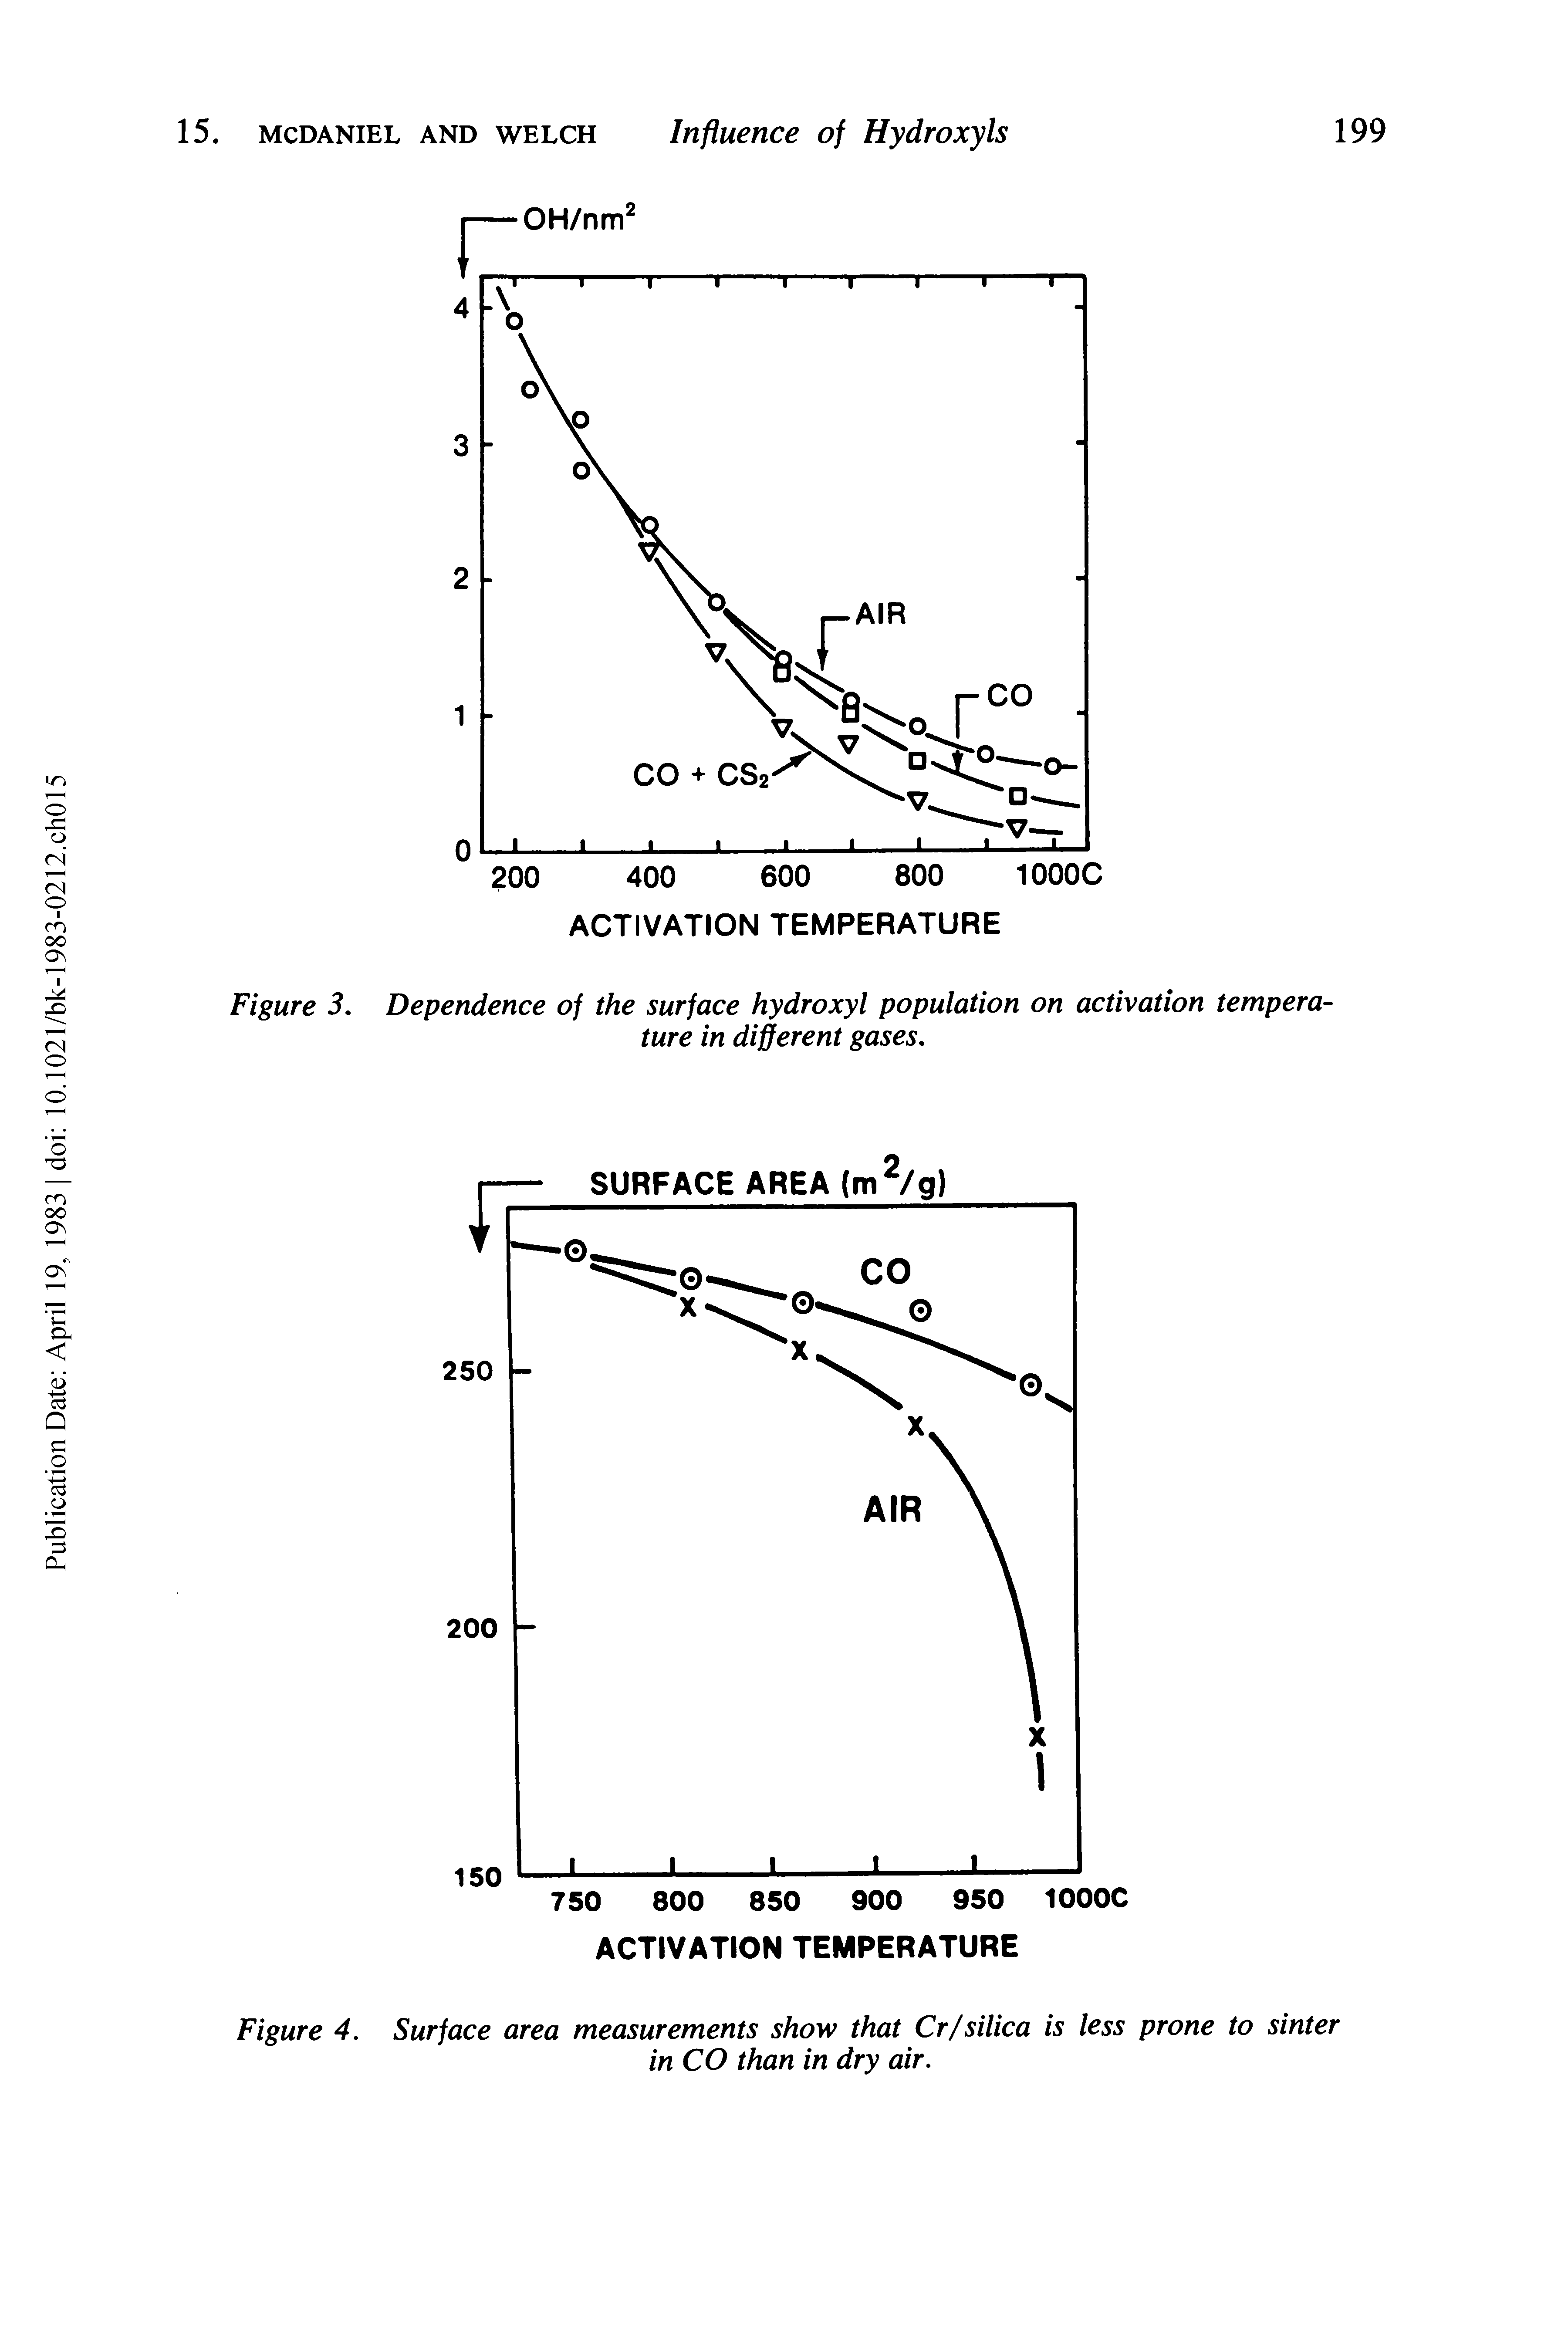 Figure 3. Dependence of the surface hydroxyl population on activation temperature in different gases.